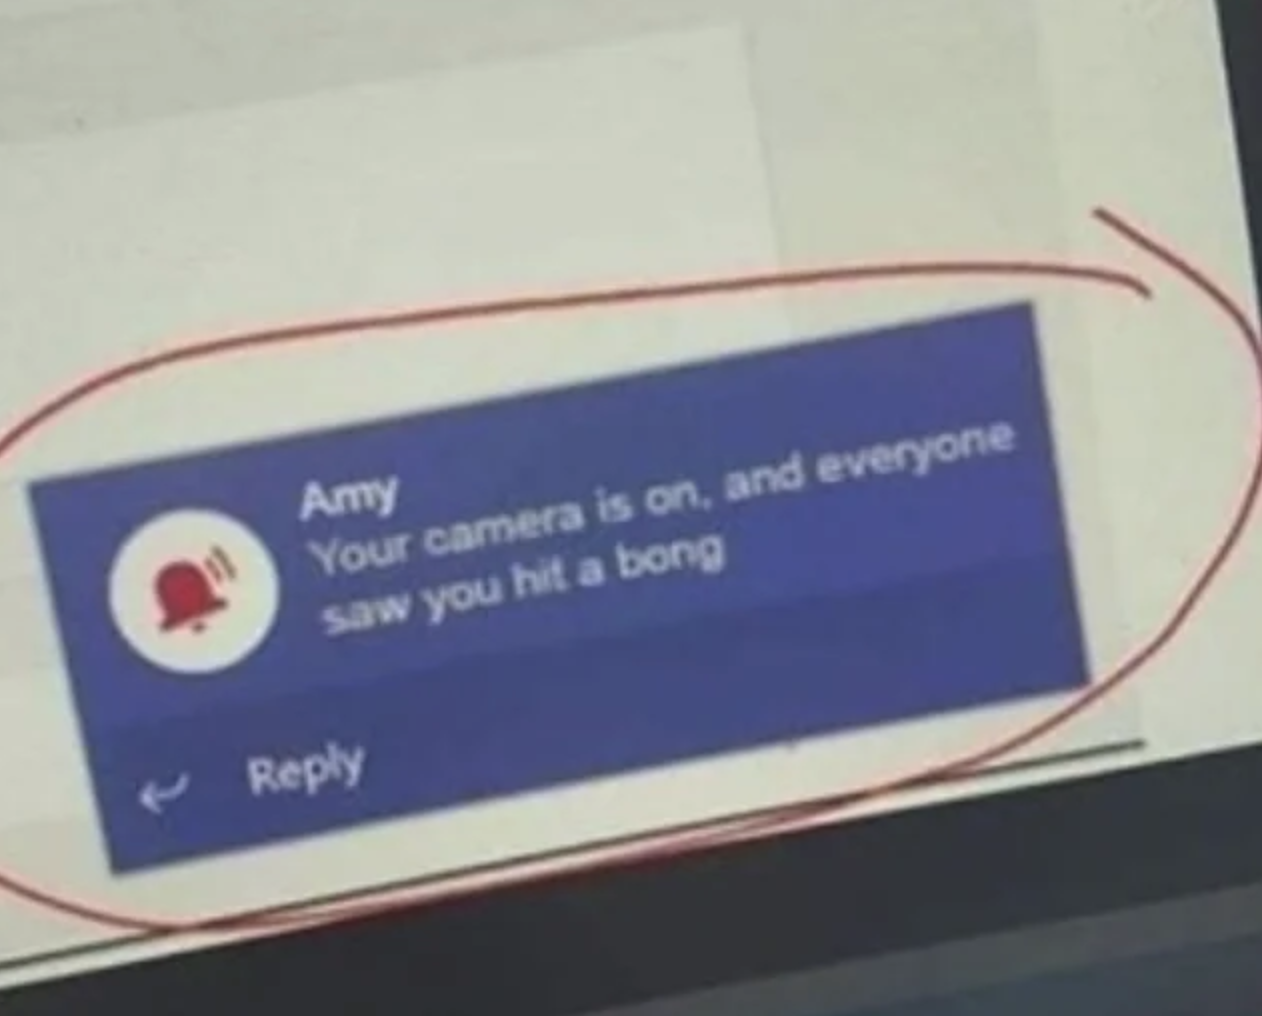 message on a zoom call reading your camera is on and everyone saw you hit a bong